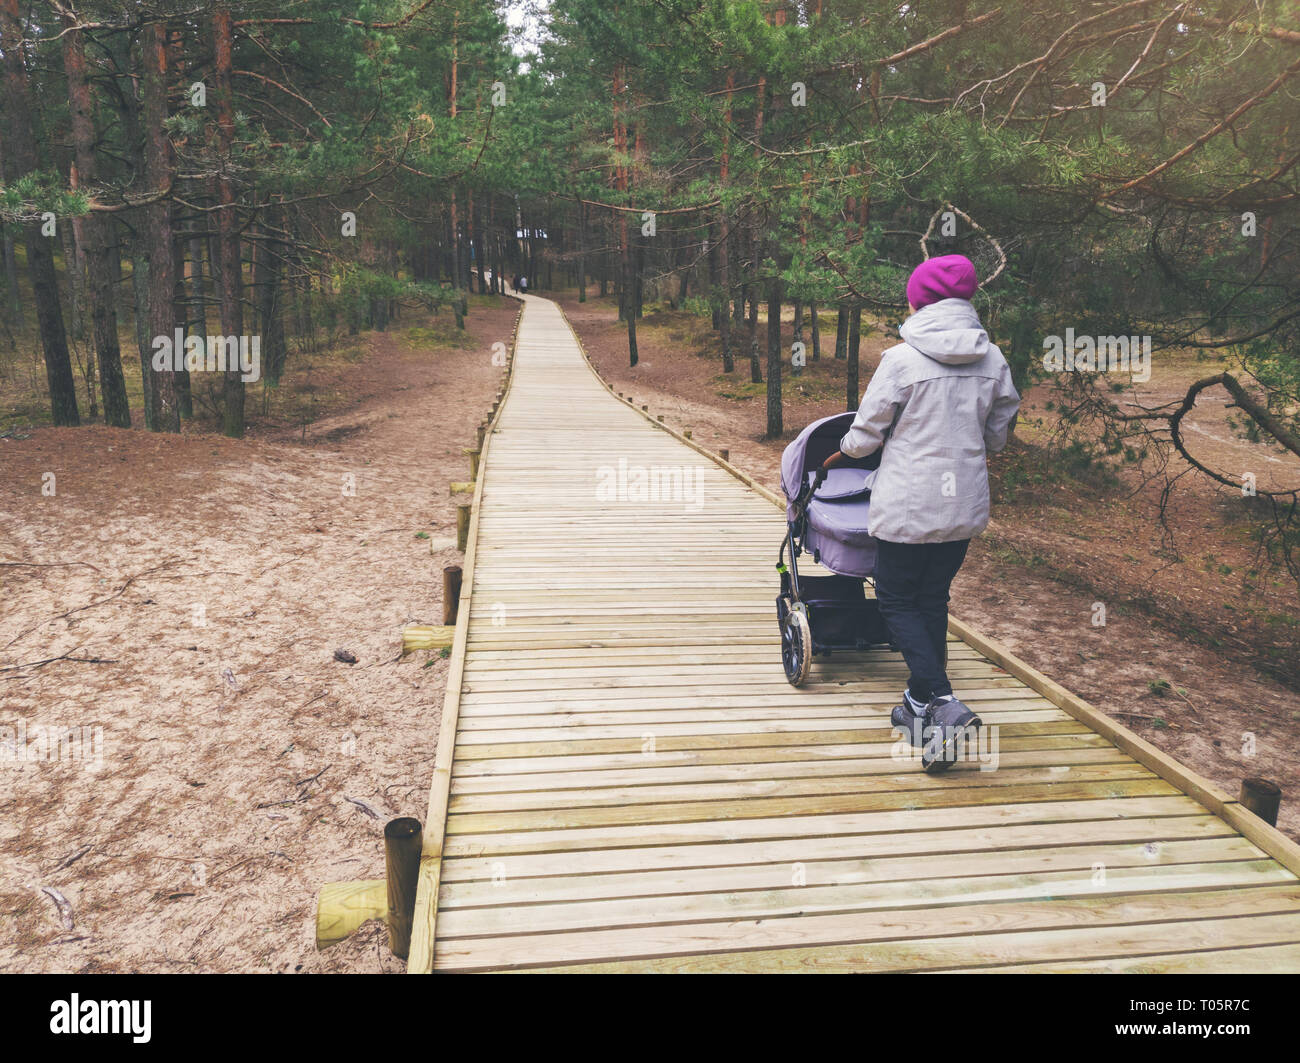 woman with stroller walking on wooden pedestrian path in forest Stock Photo